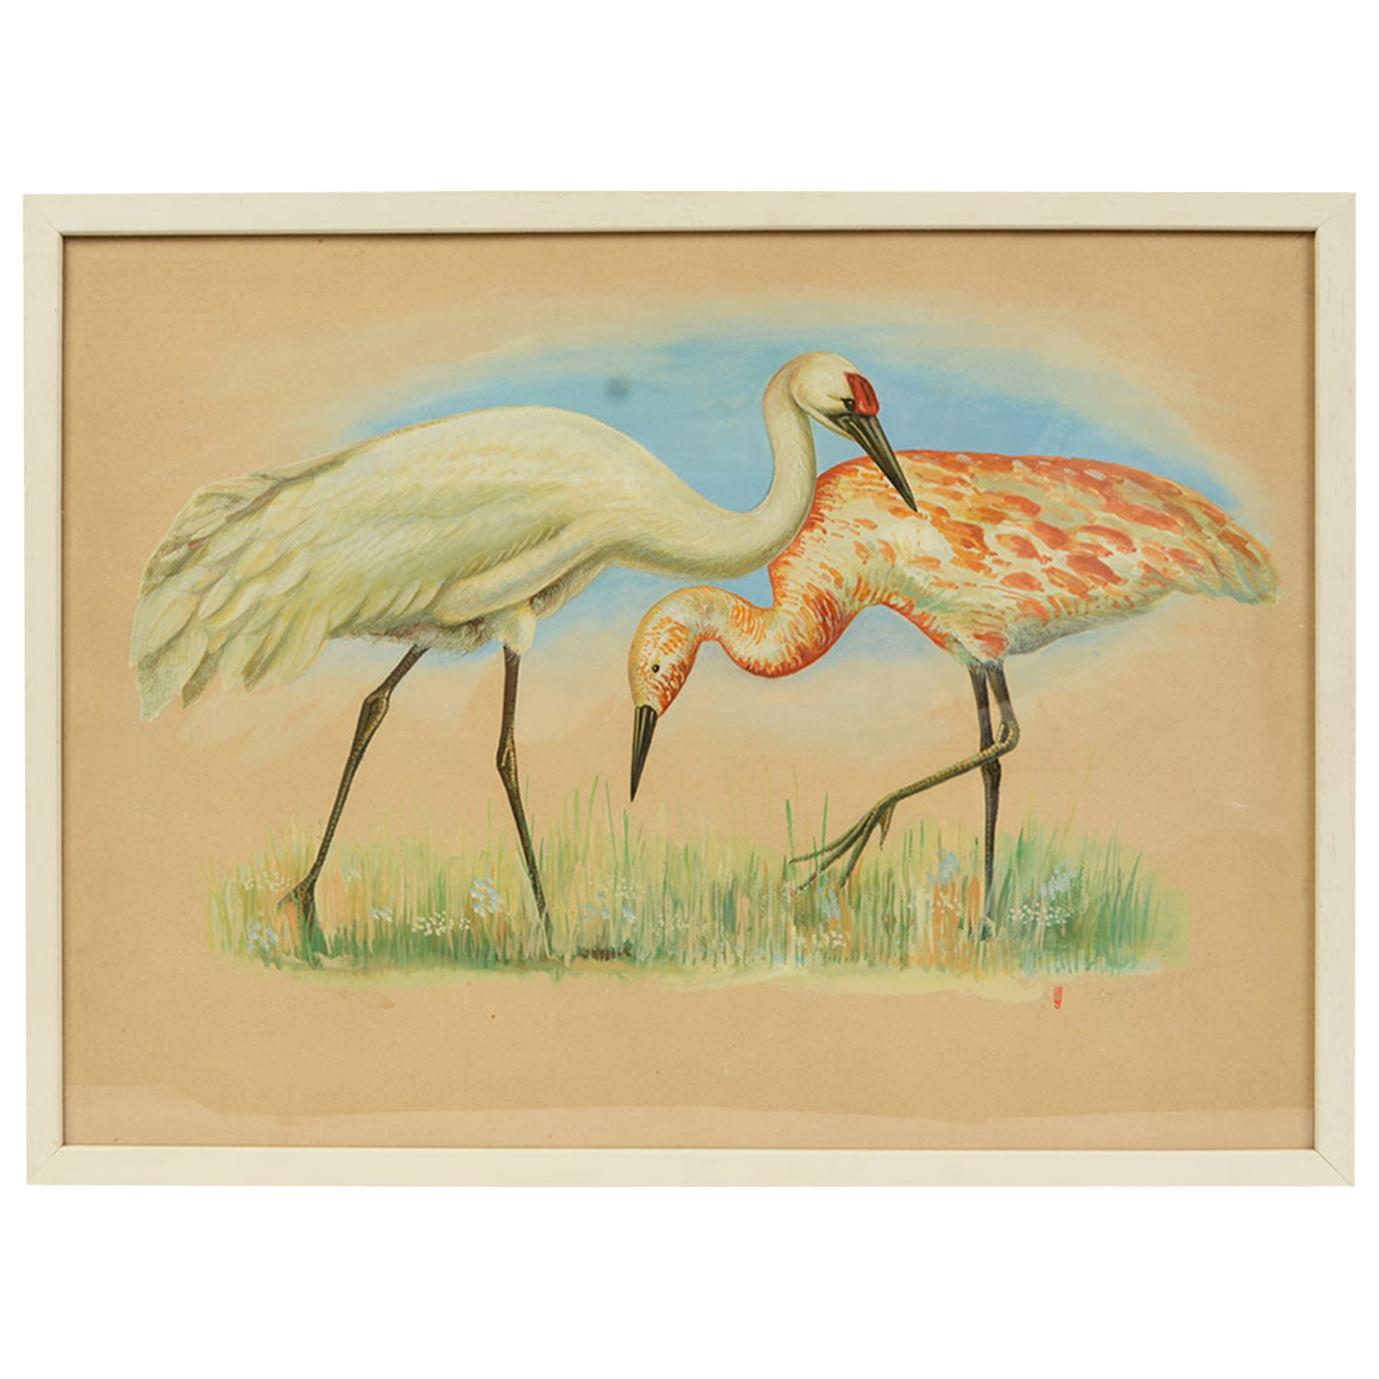 Sketch of two herons Korea 1970s Acrylic on paper for an Animals Encyclopedia